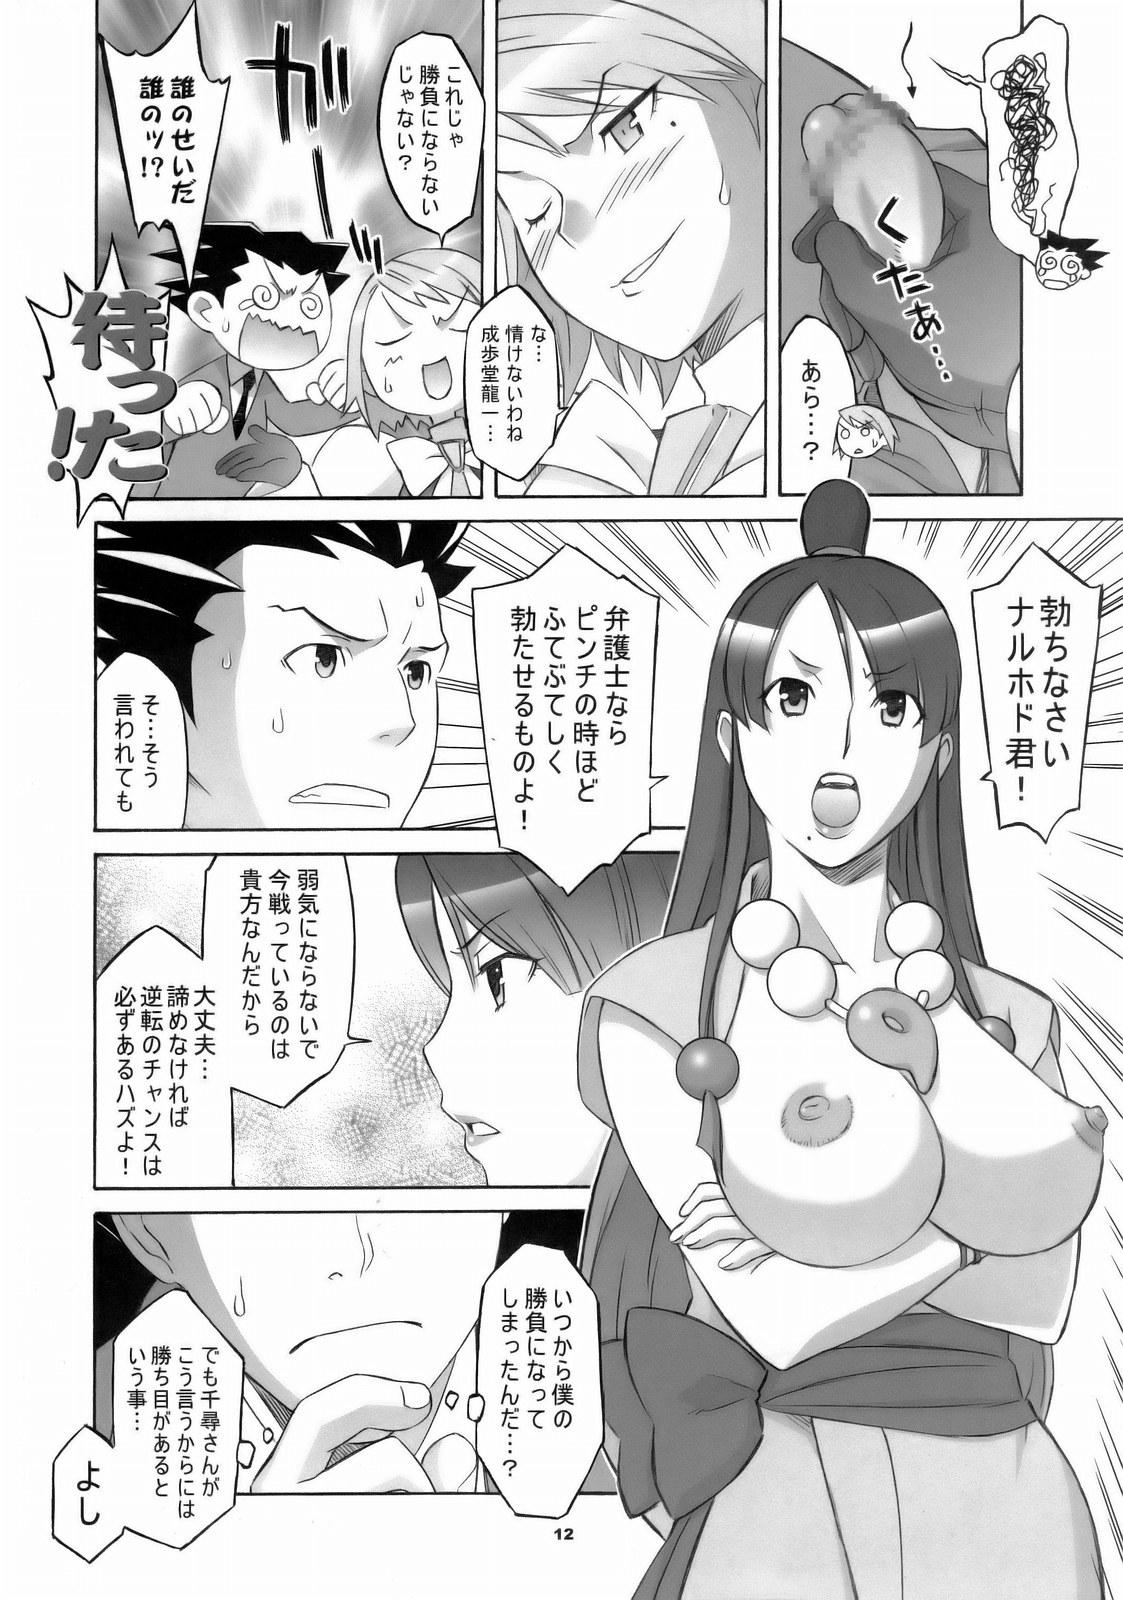 Tanned Gyakuten Shaiban - Ace attorney Kissing - Page 11